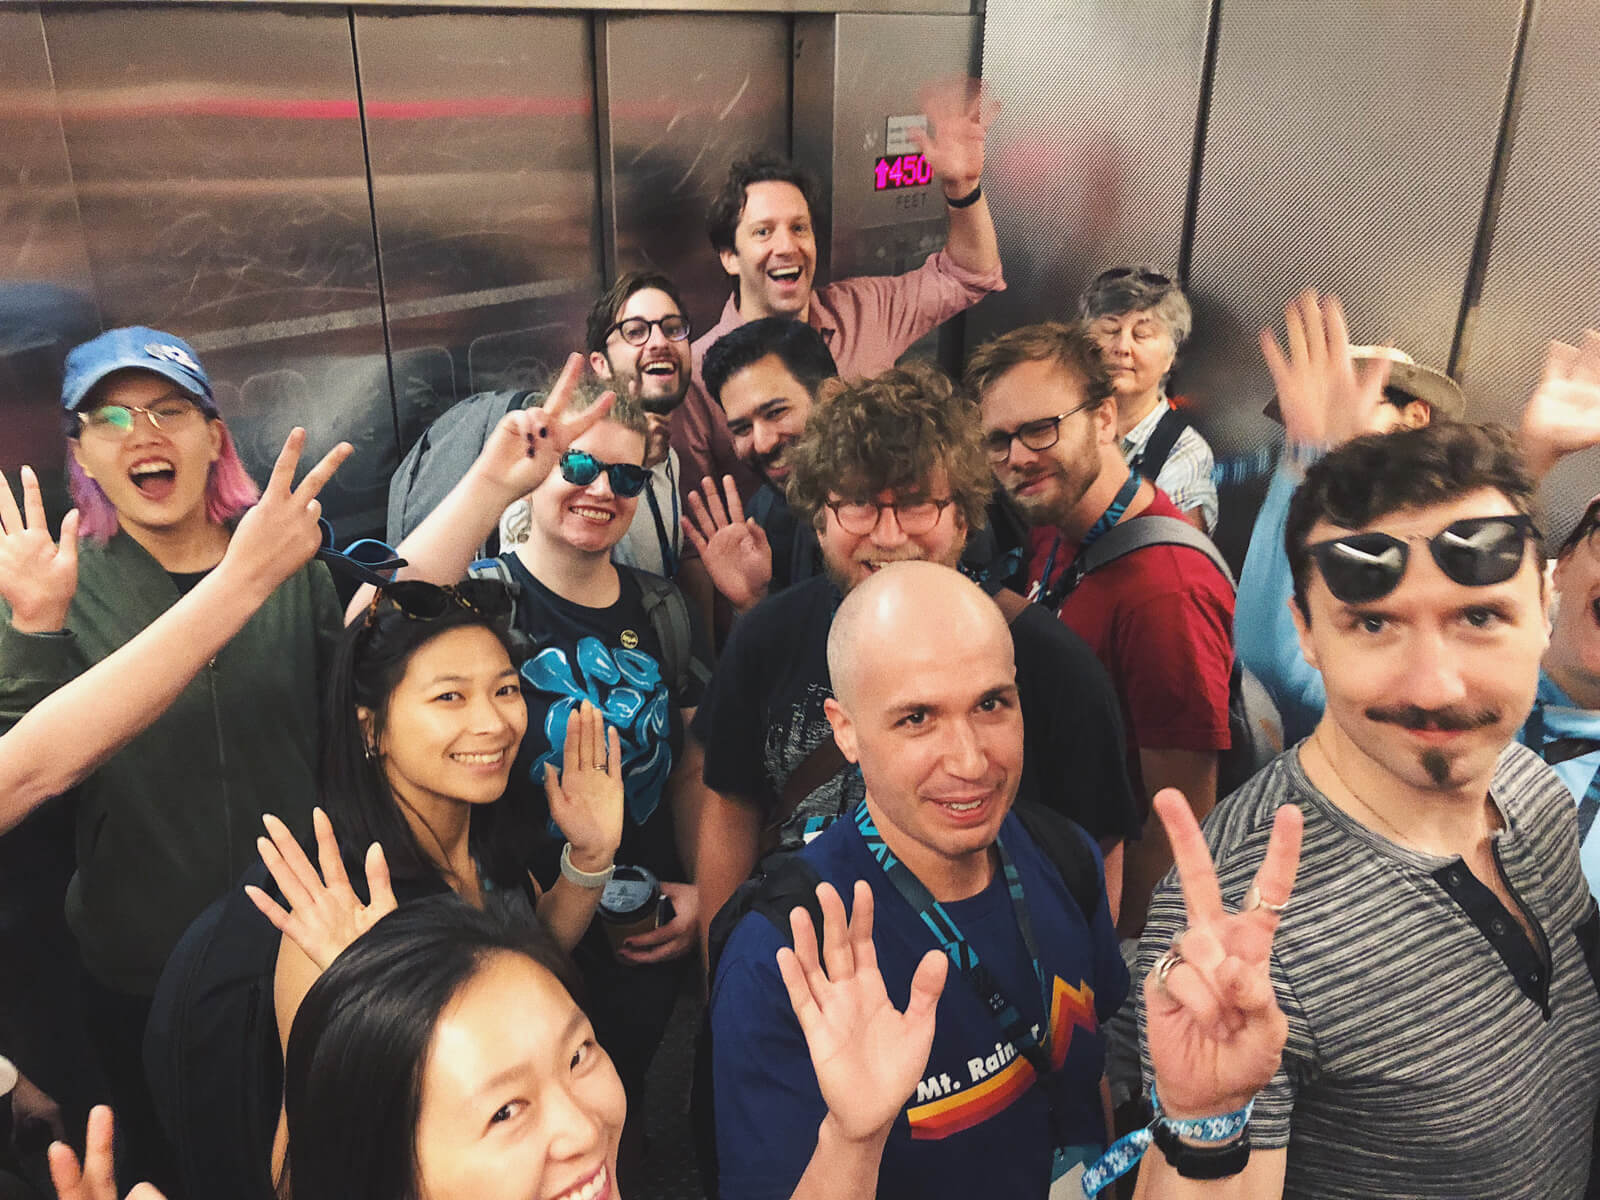 A handful of people in an elevator, all of them smiling/waving.